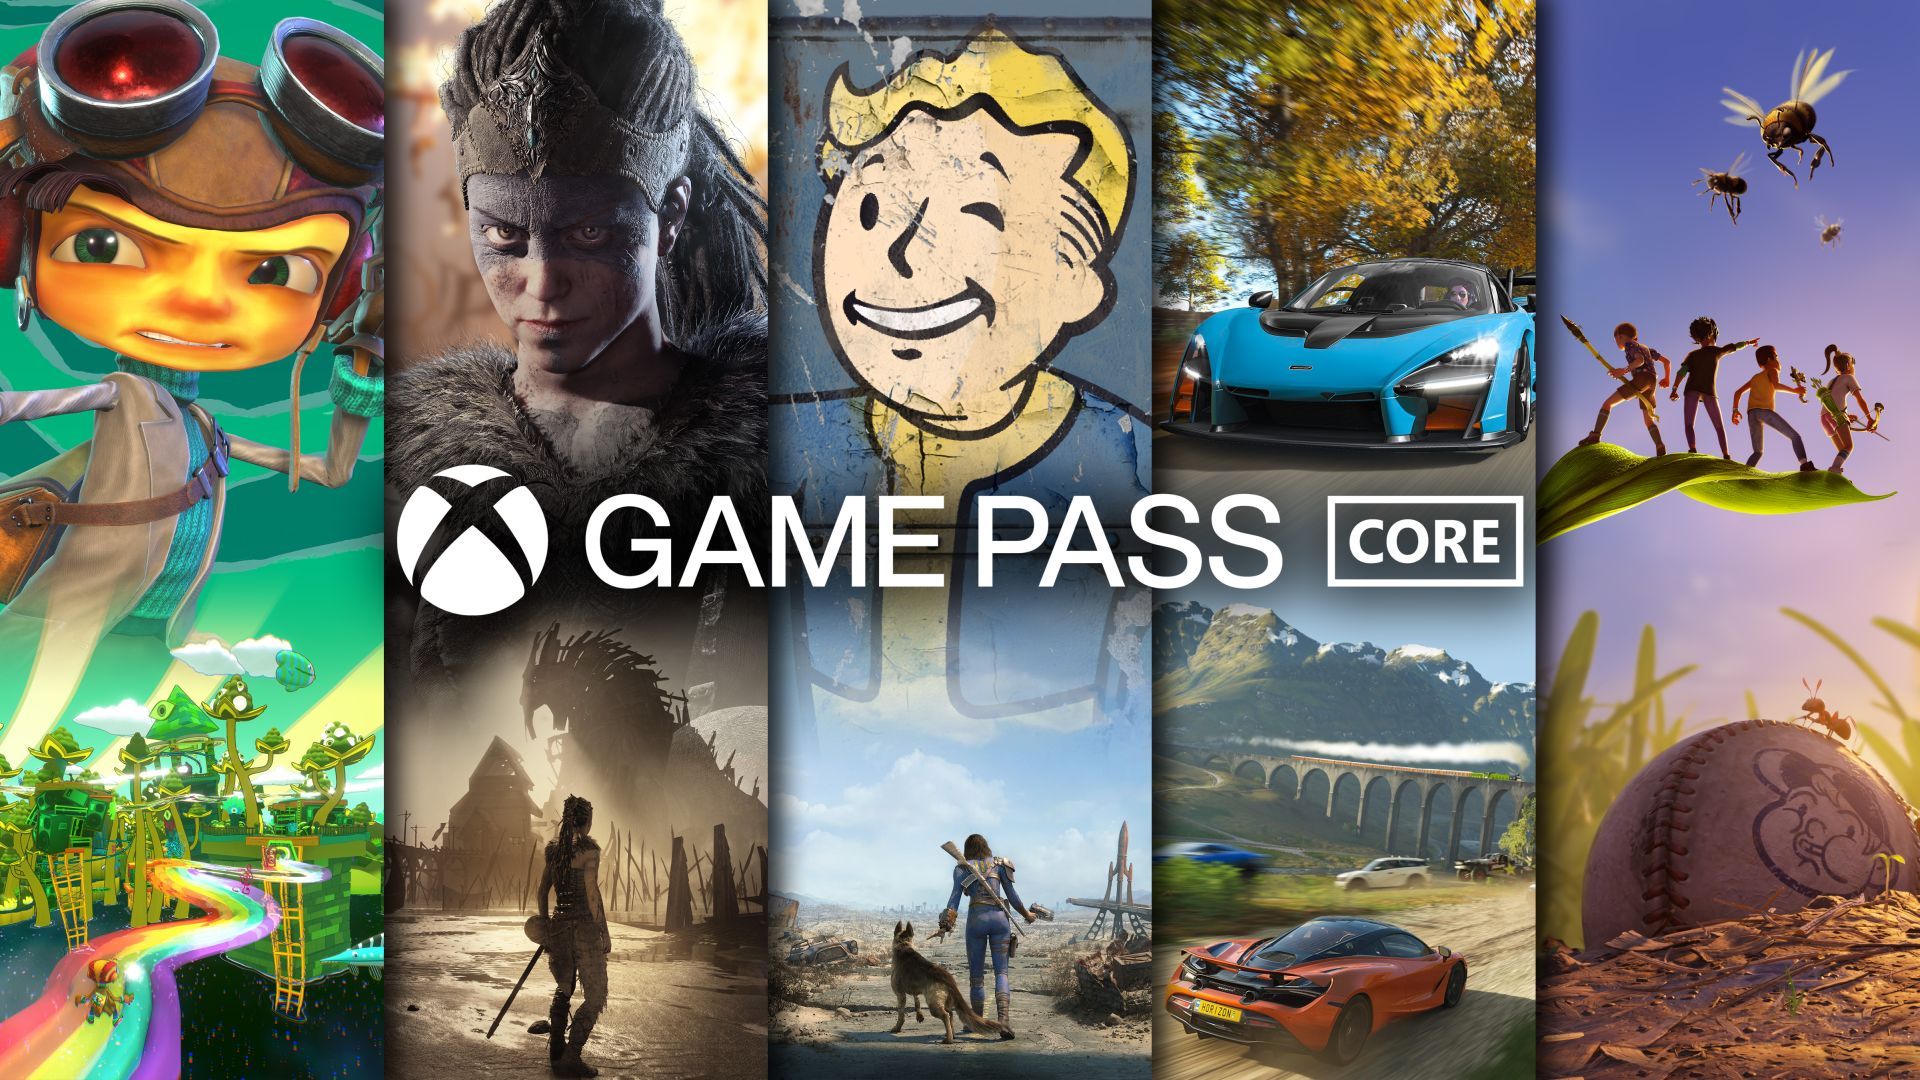 XBOX Game Pass Core 12 Months Subscription Card US